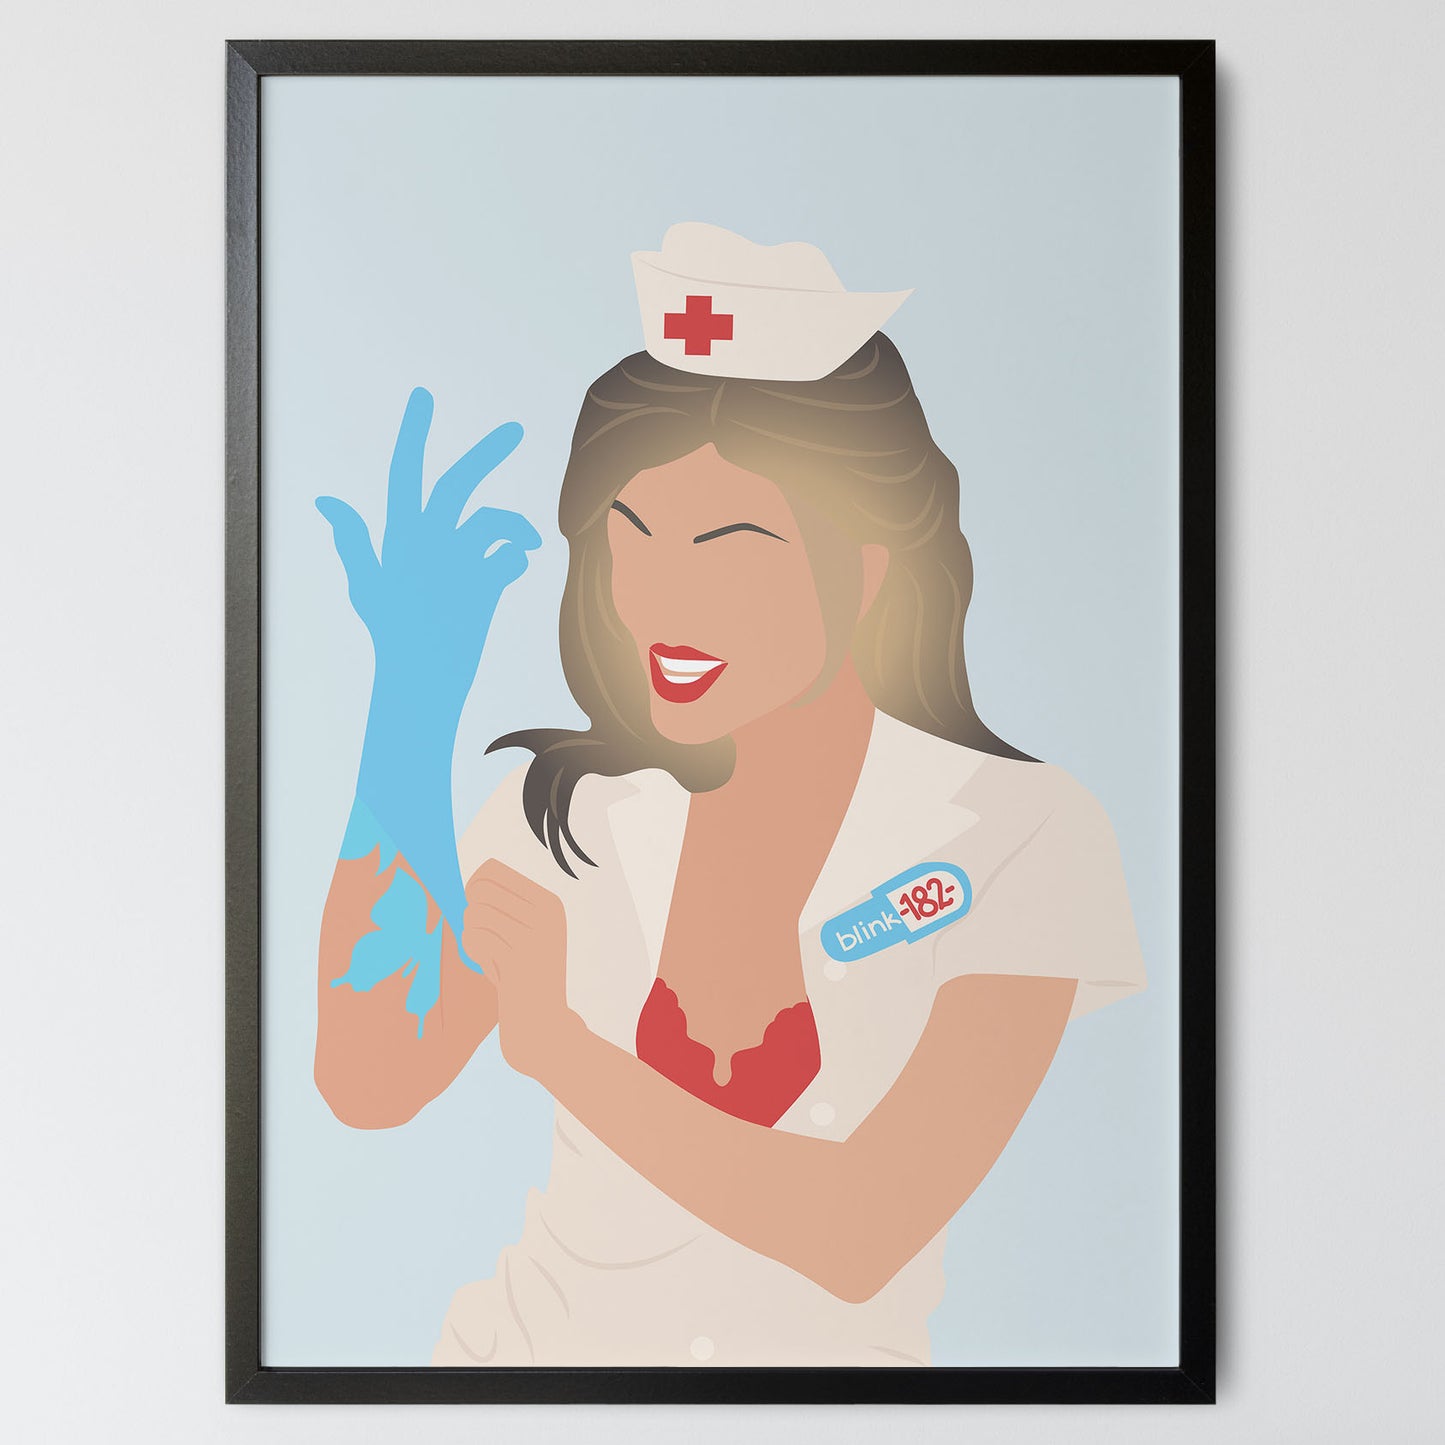 Blink 182 Poster - Enema of the State